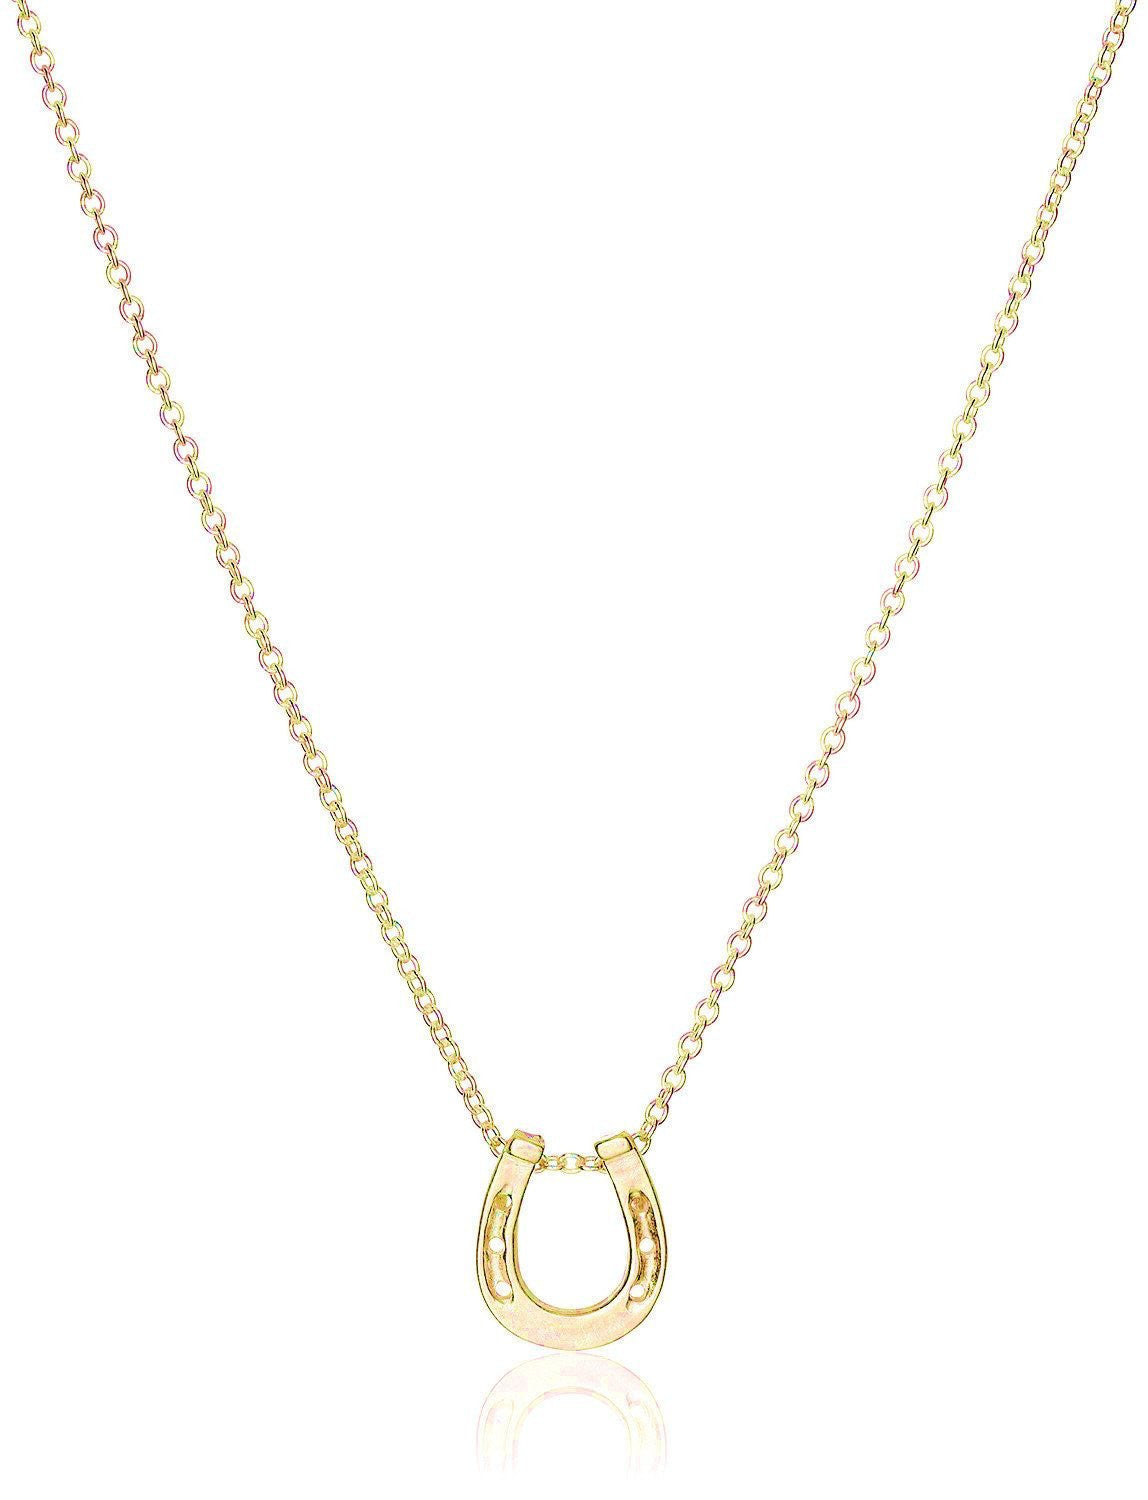 Gold Dipped Horseshoe Pendant Necklace WIthout Card Necklace